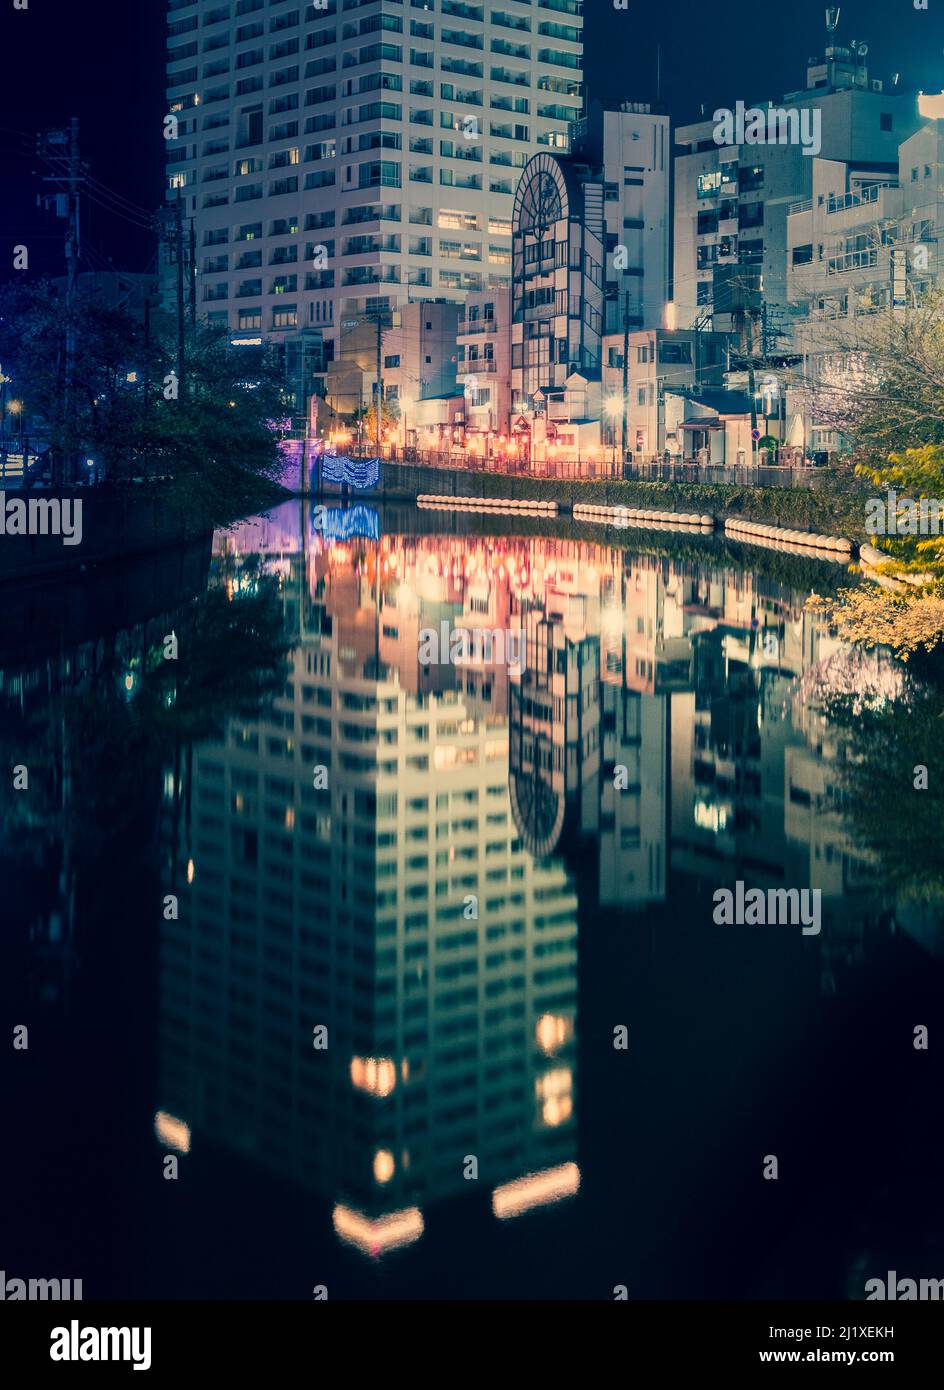 Shot of the Ooka River (大岡川) as it winds along the Hinode Sakura Michi street (日の出さくら道) near Hinodecho Station featuring reflections of a high-rise ap Stock Photo